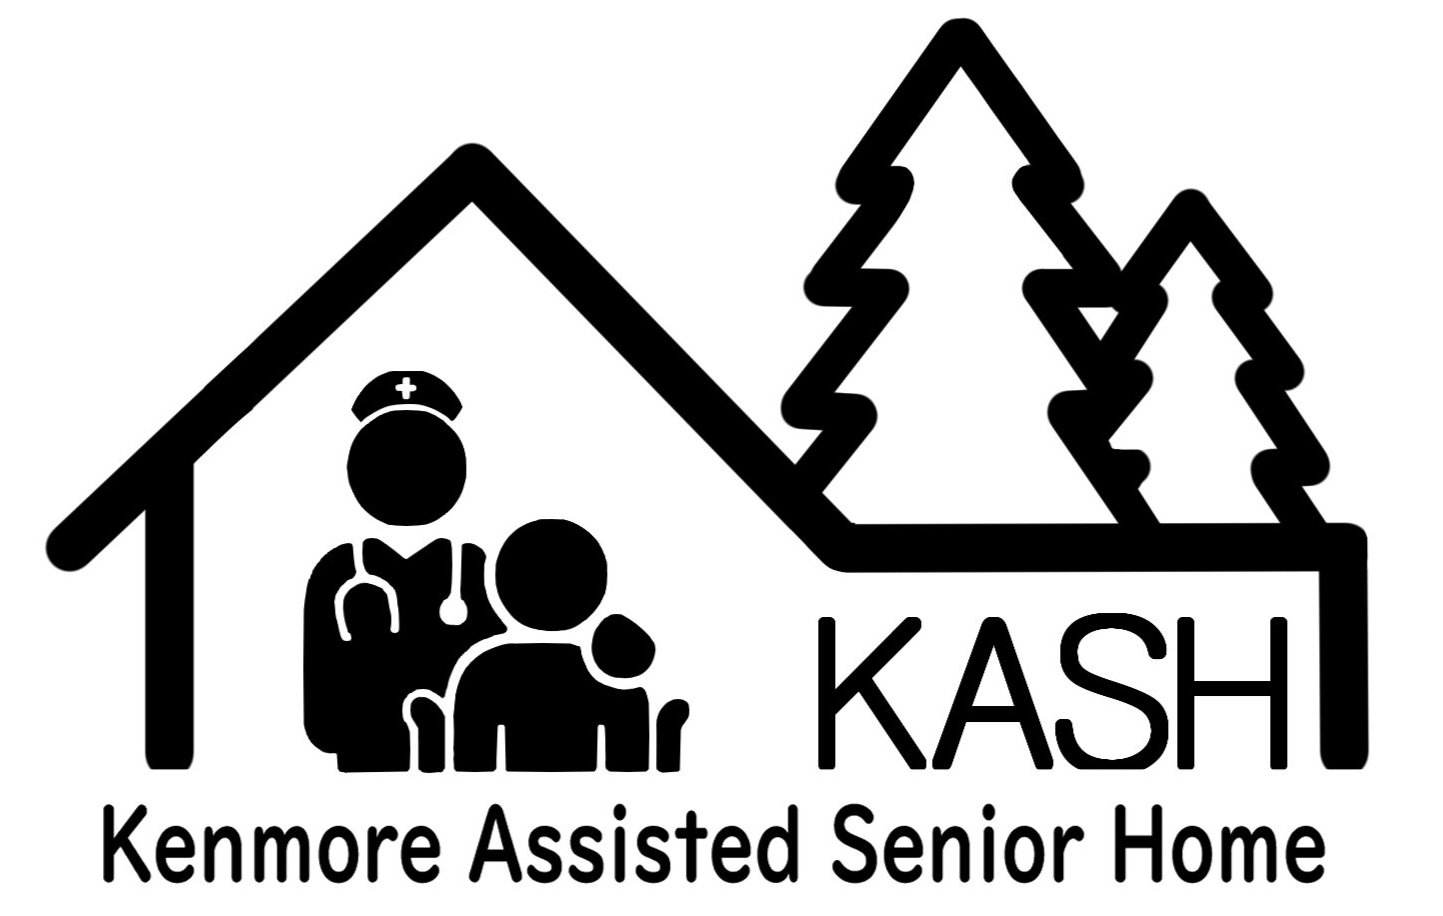 Kenmore Assisted Senior Home